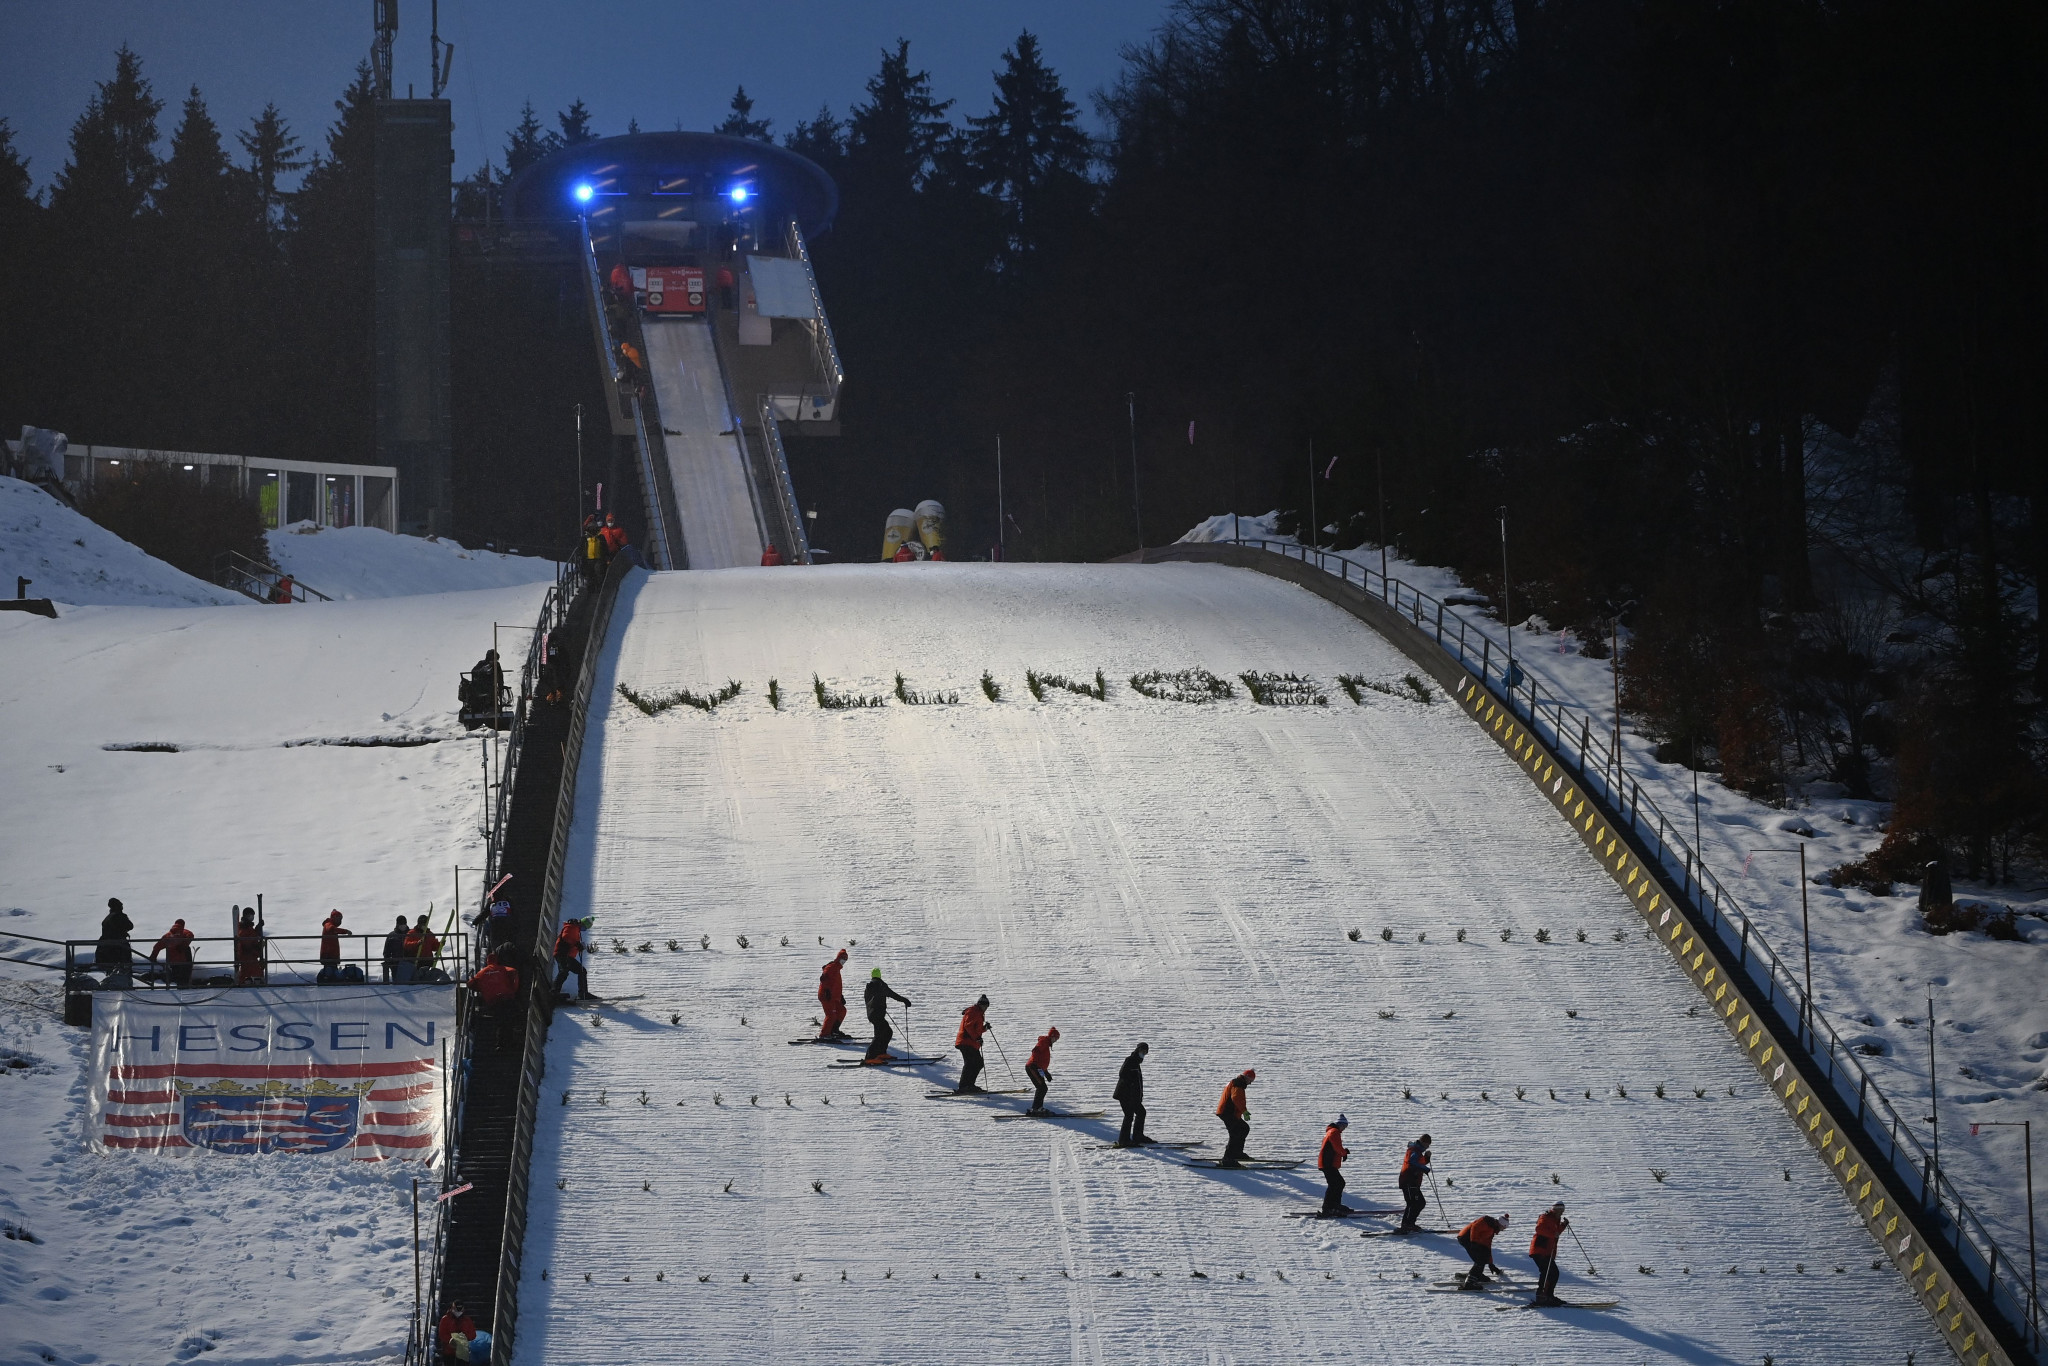 Ski Jumping World Cup competition is set to be held on the Mühlenkopfschanze large hill in Willingen ©Getty Images